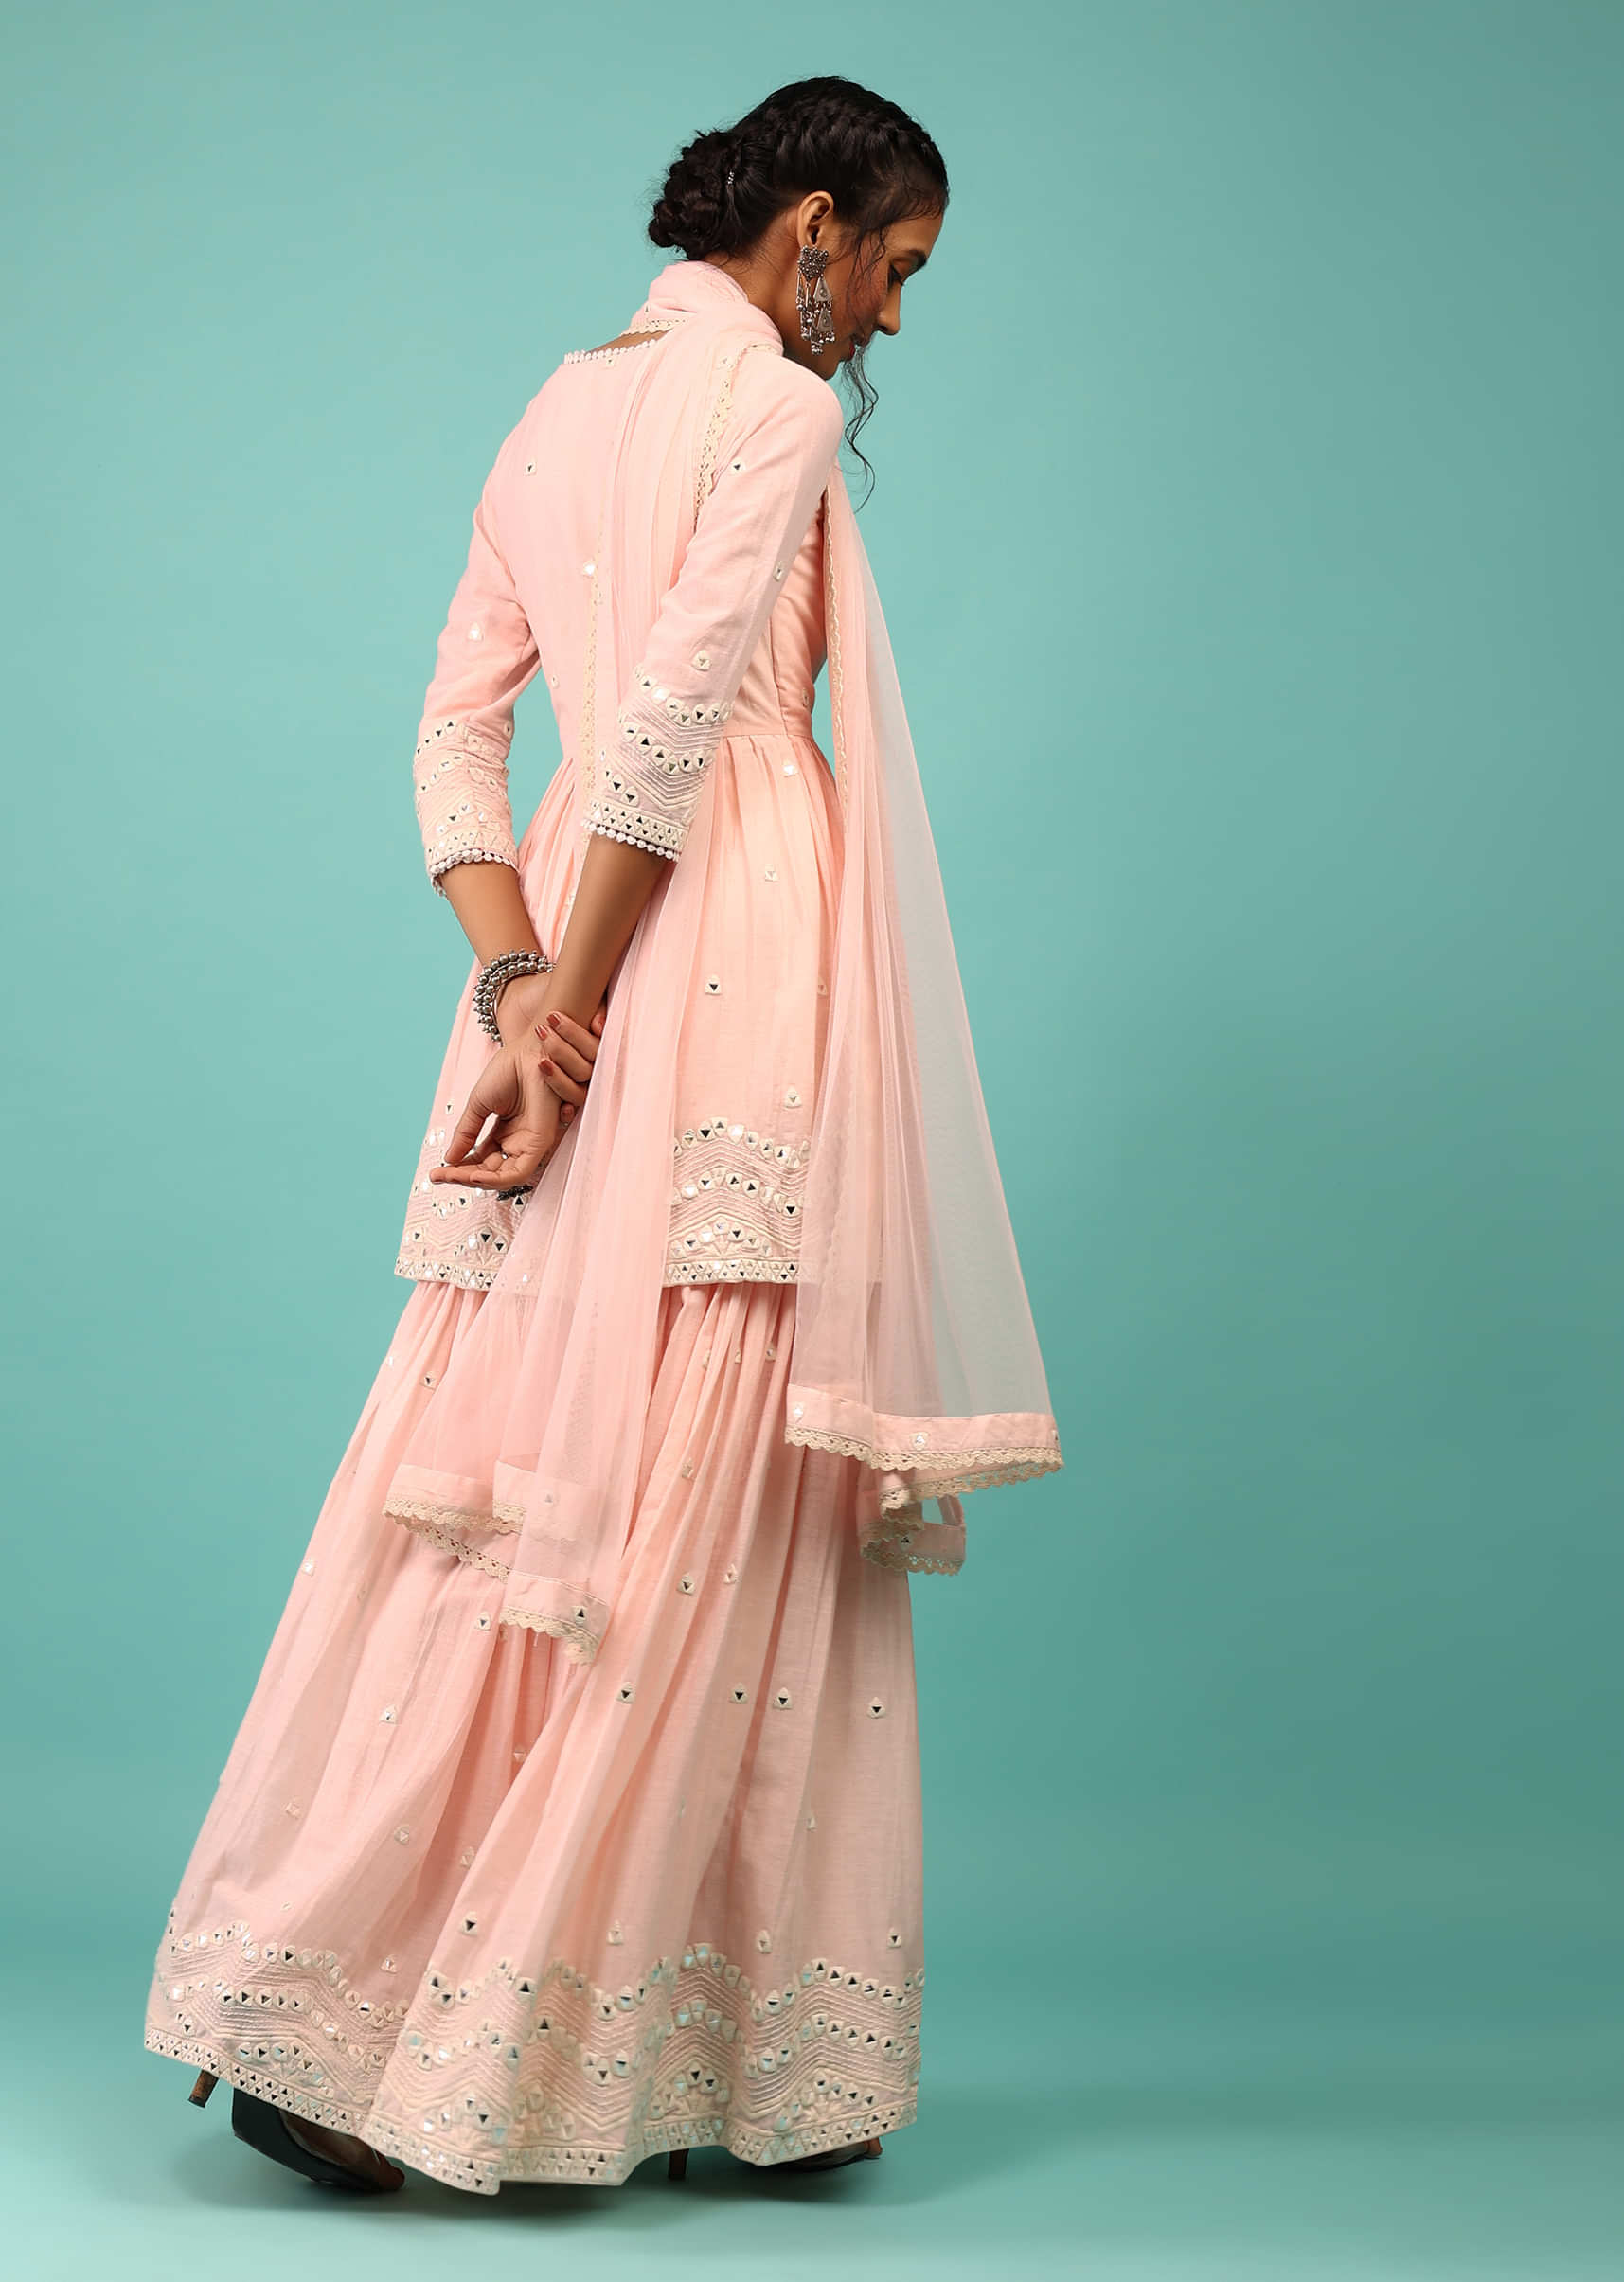 Cotton Candy Pink Sharara Suit Finished With Lucknowi Geometric Embroidered And Peplum Top